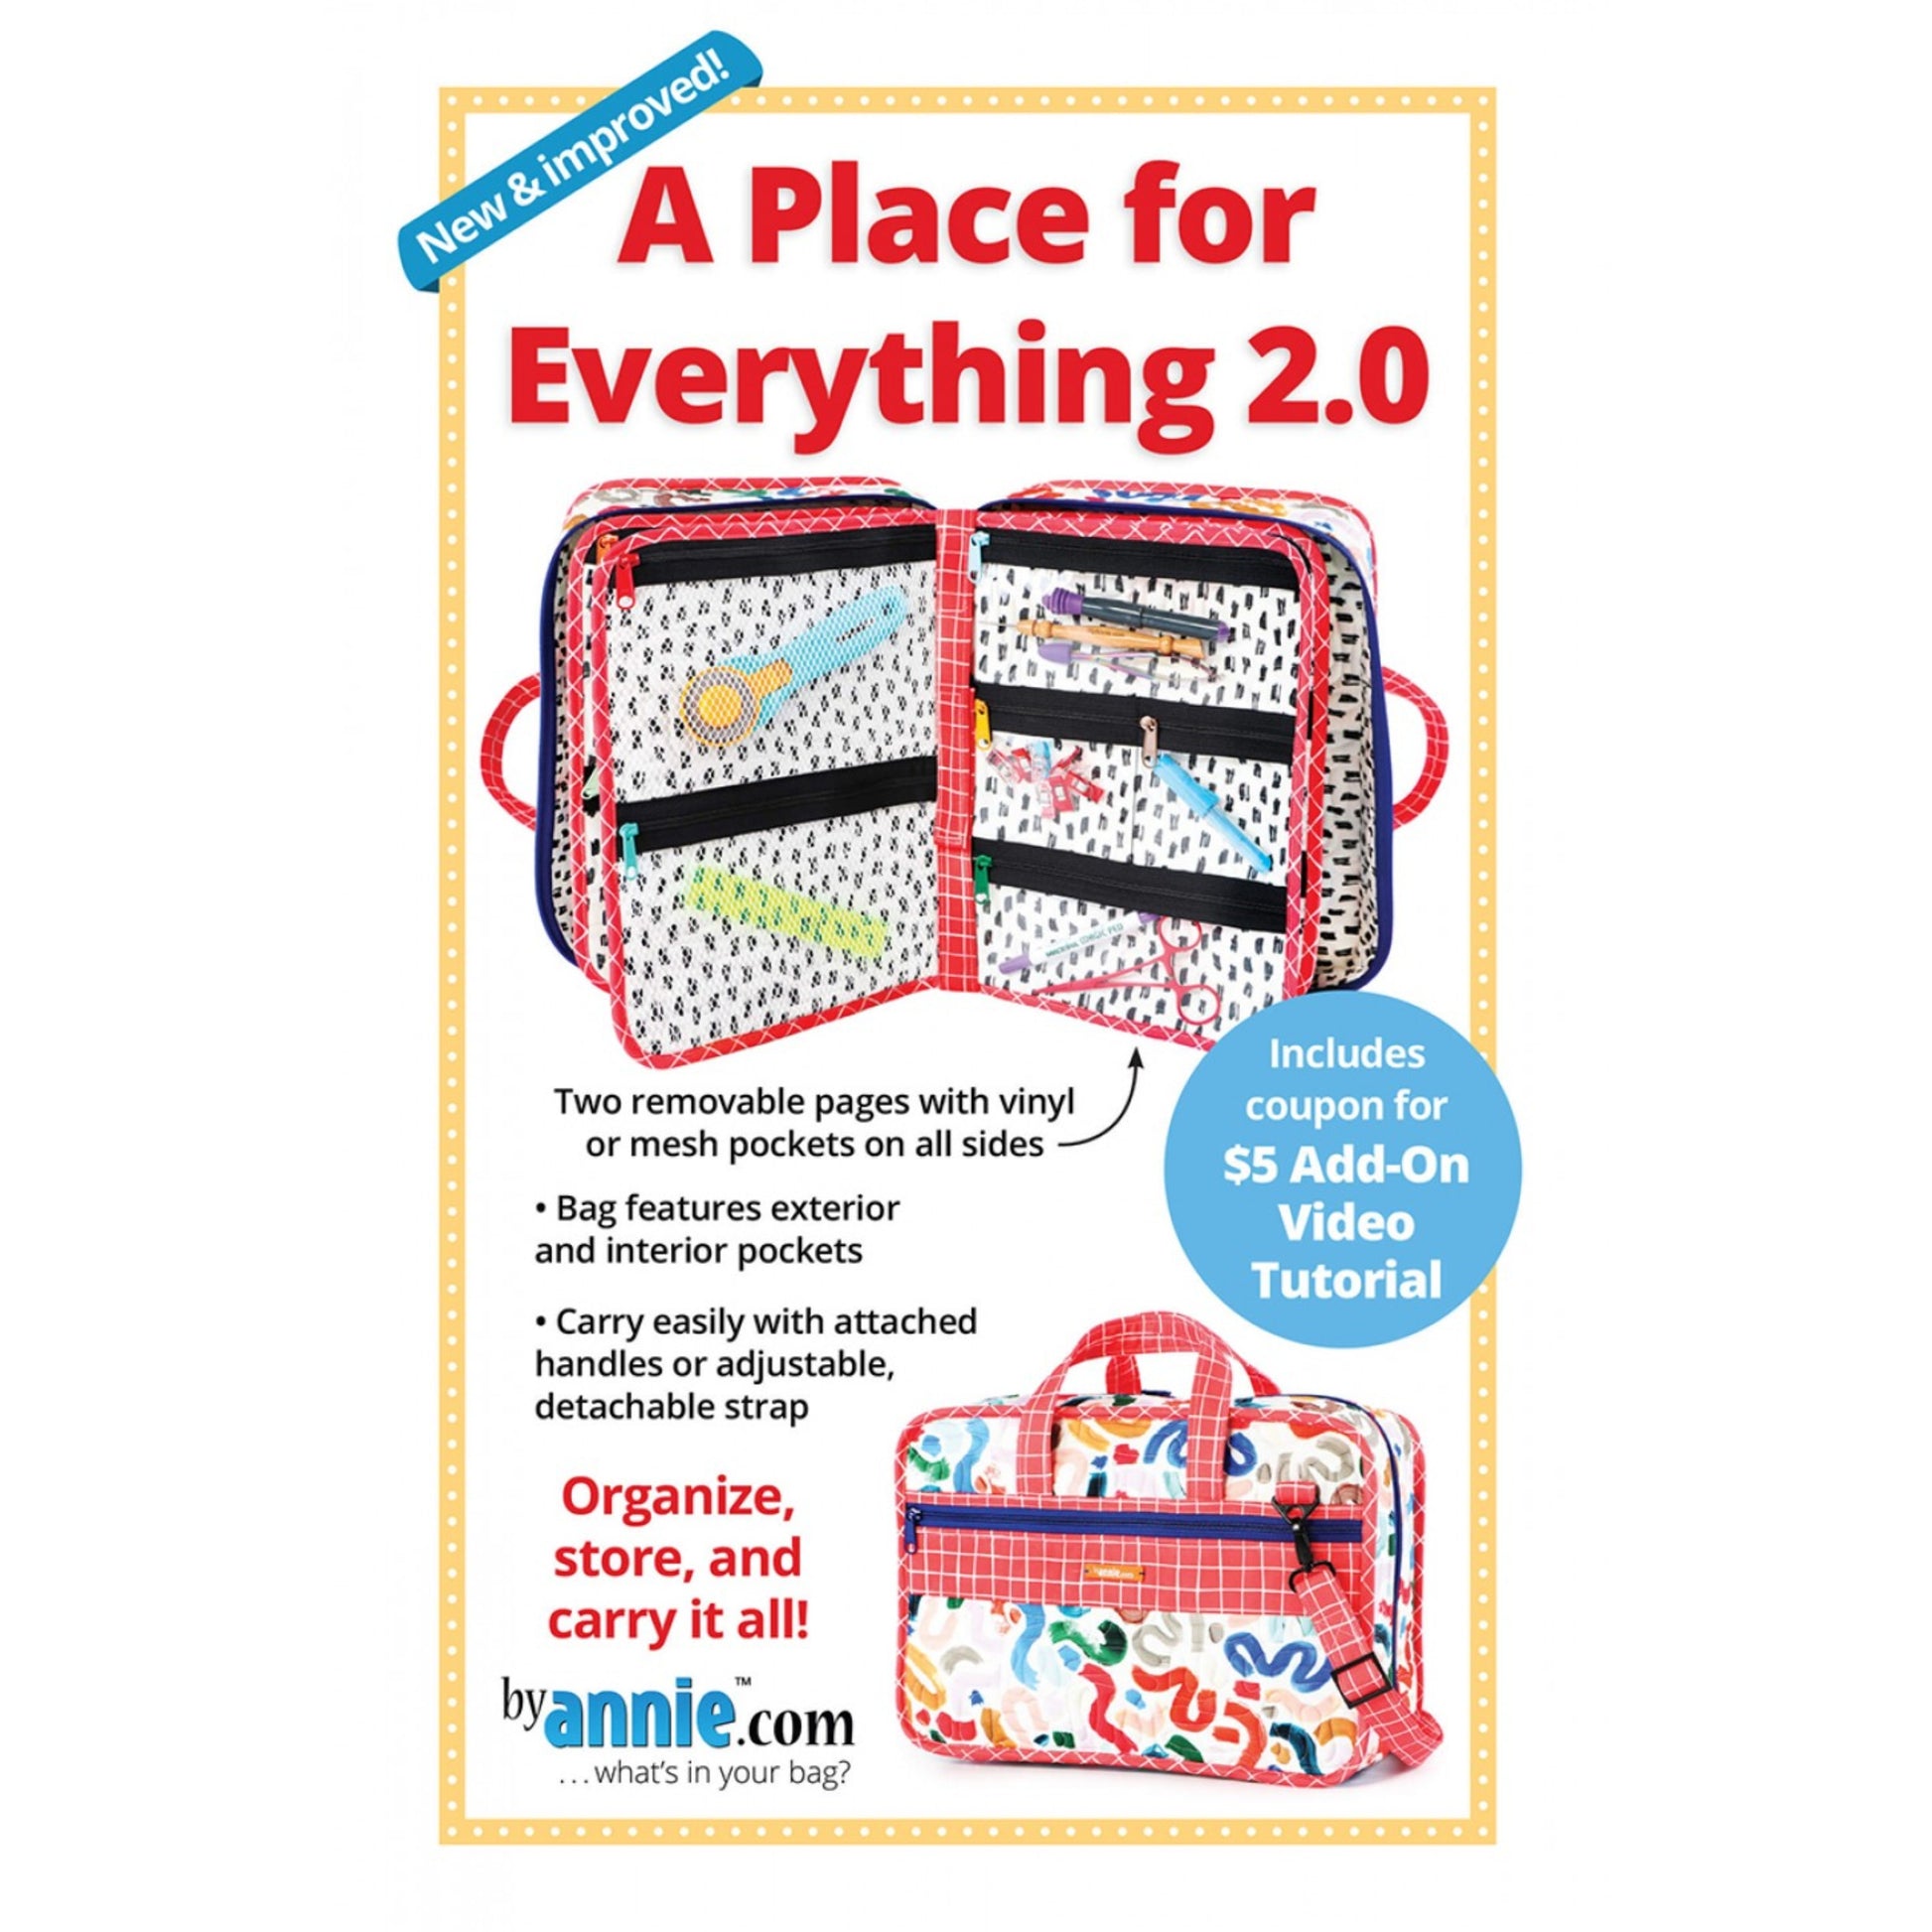 This spacious organizer stores and carries tools and supplies, providing visibility and easy access to all.  The bag features handles and an adjustable/detachable carrying strap along with two removable pocket pages with mesh or vinyl pockets in a variety of styles.  Abundant pockets in a variety of styles are the key to ensuring that there is a place for everything … and that everything is in its place!  The case measures about 10"H x 14" W x 5½"D when closed with removable pages measuring 13"H x 20"W.